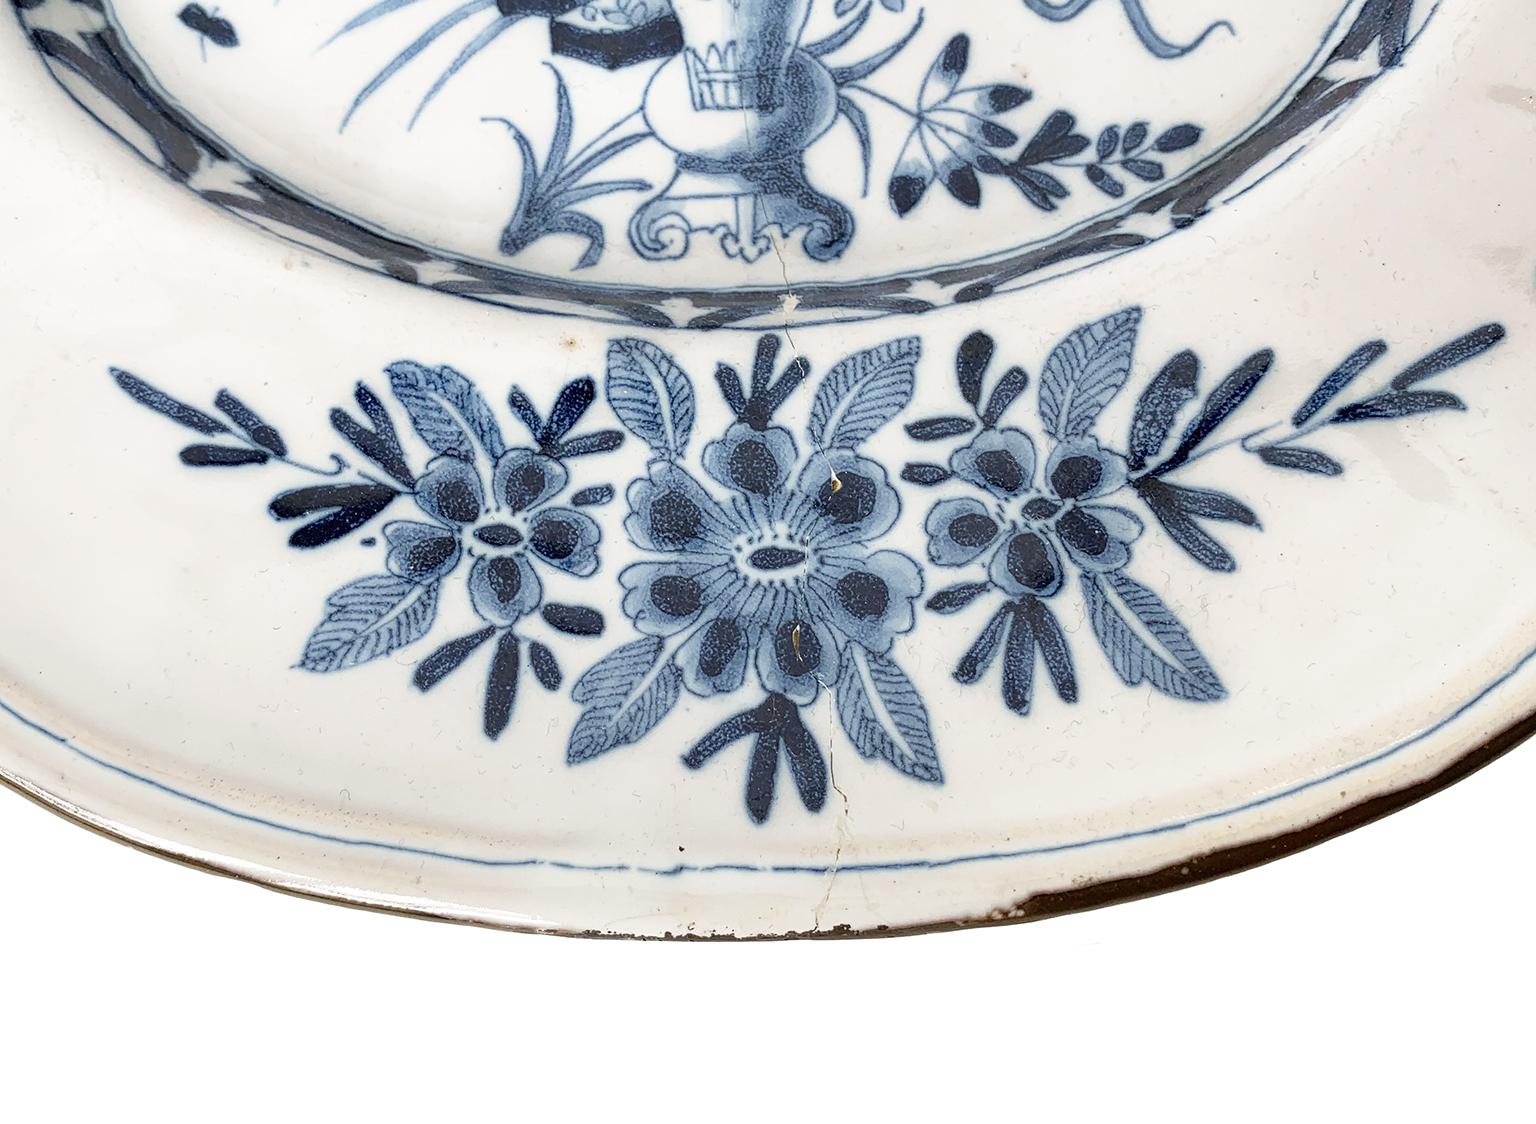 Maiolica Oval Tray, Felice Clerici Manufactory, Milan, Circa 1770-1780 For Sale 3